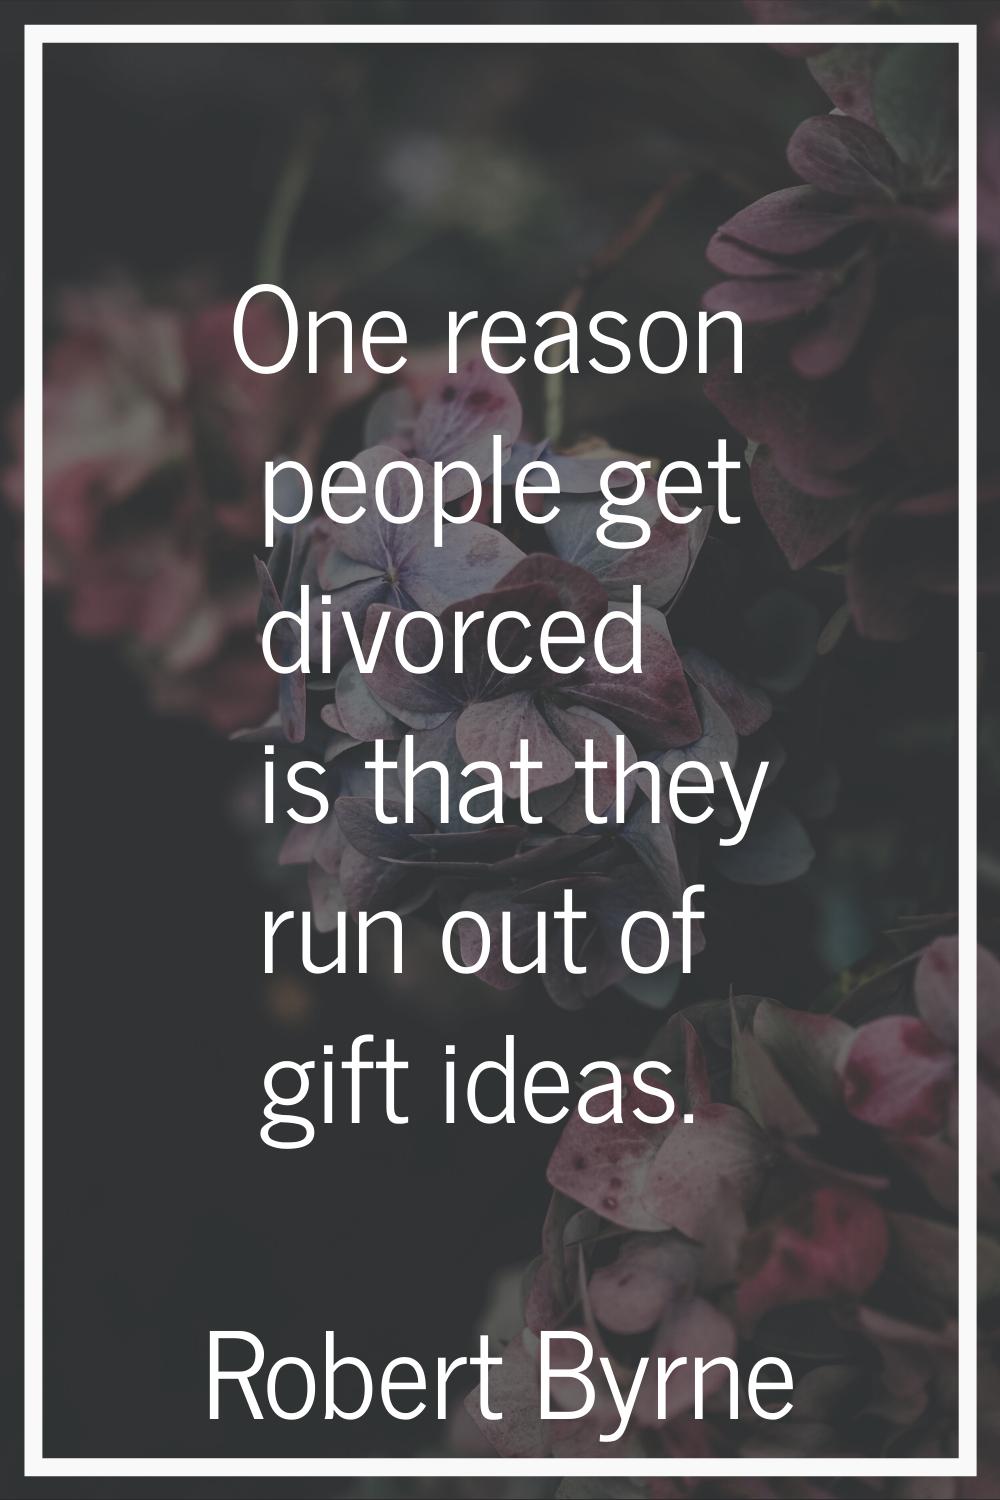 One reason people get divorced is that they run out of gift ideas.